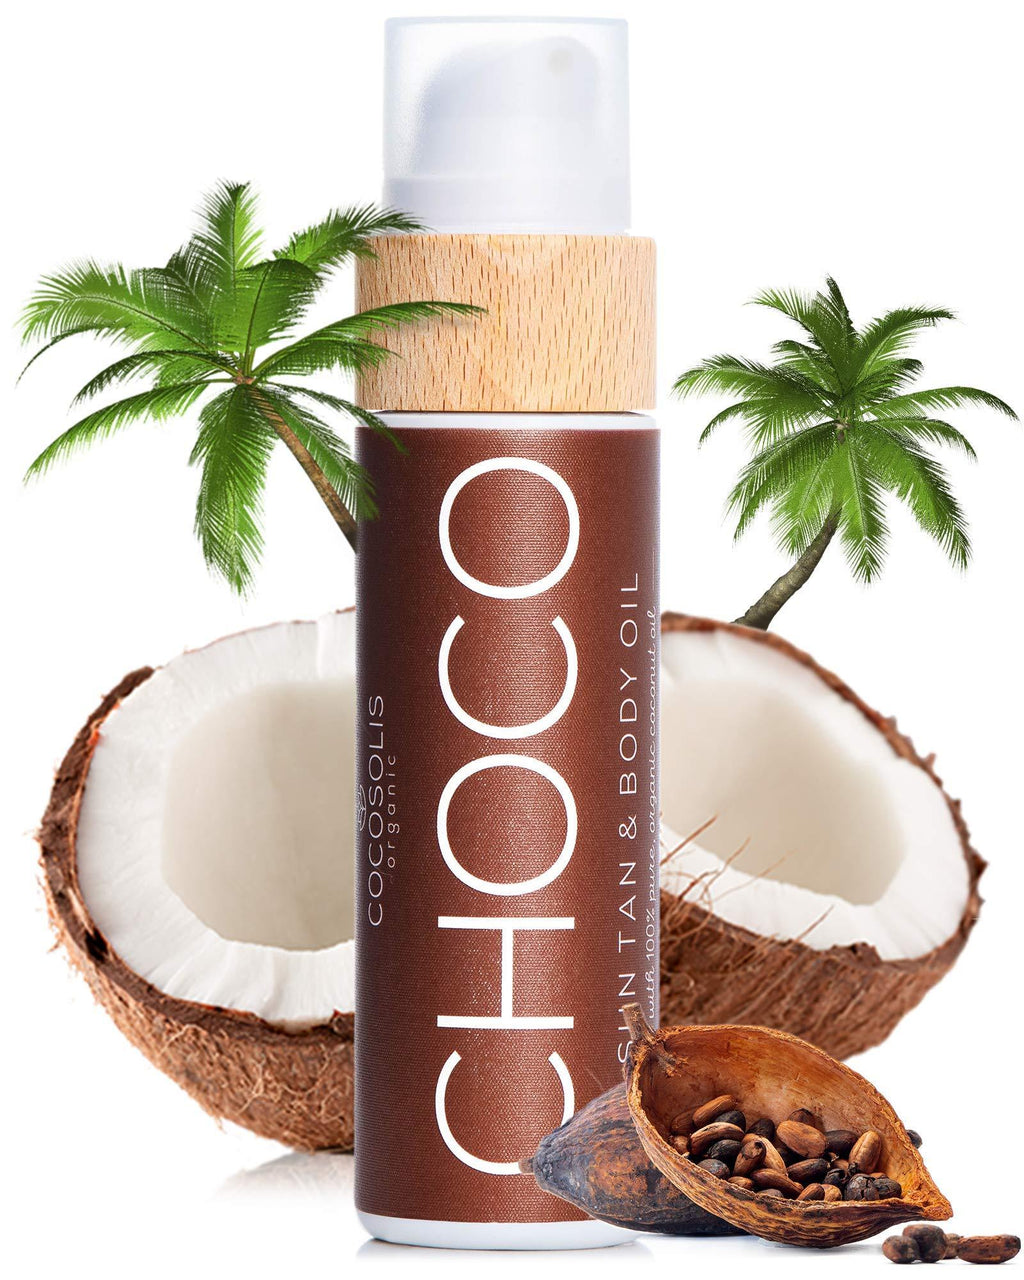 [Australia] - COCOSOLIS Choco Suntan & Body Oil - Organic Tanning Bed Lotion - Deep Chocolate Tan - Tanning Accelerator for Indoor Tanning Beds (110 Milliliters) 